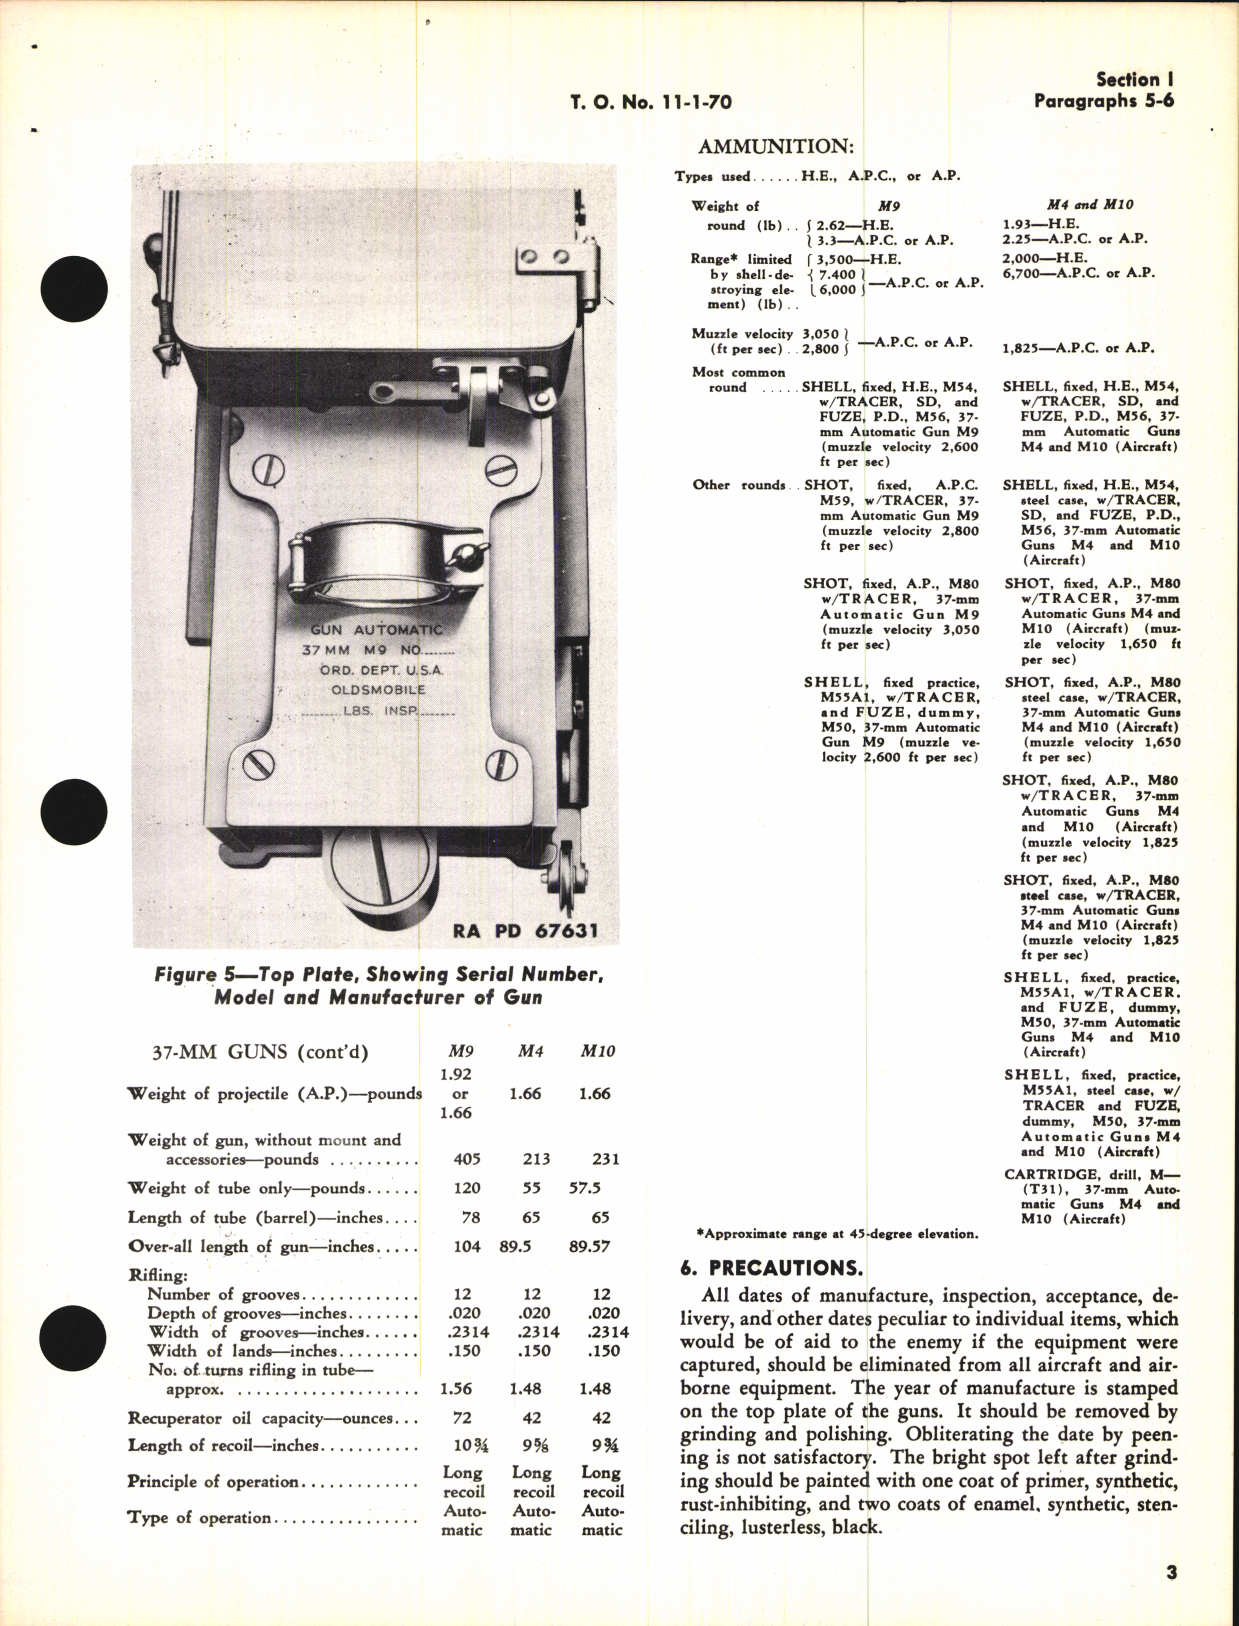 Sample page 7 from AirCorps Library document: Handbook of Instructions with Parts Catalog for 37 MM Automatic Aircraft Gun M9